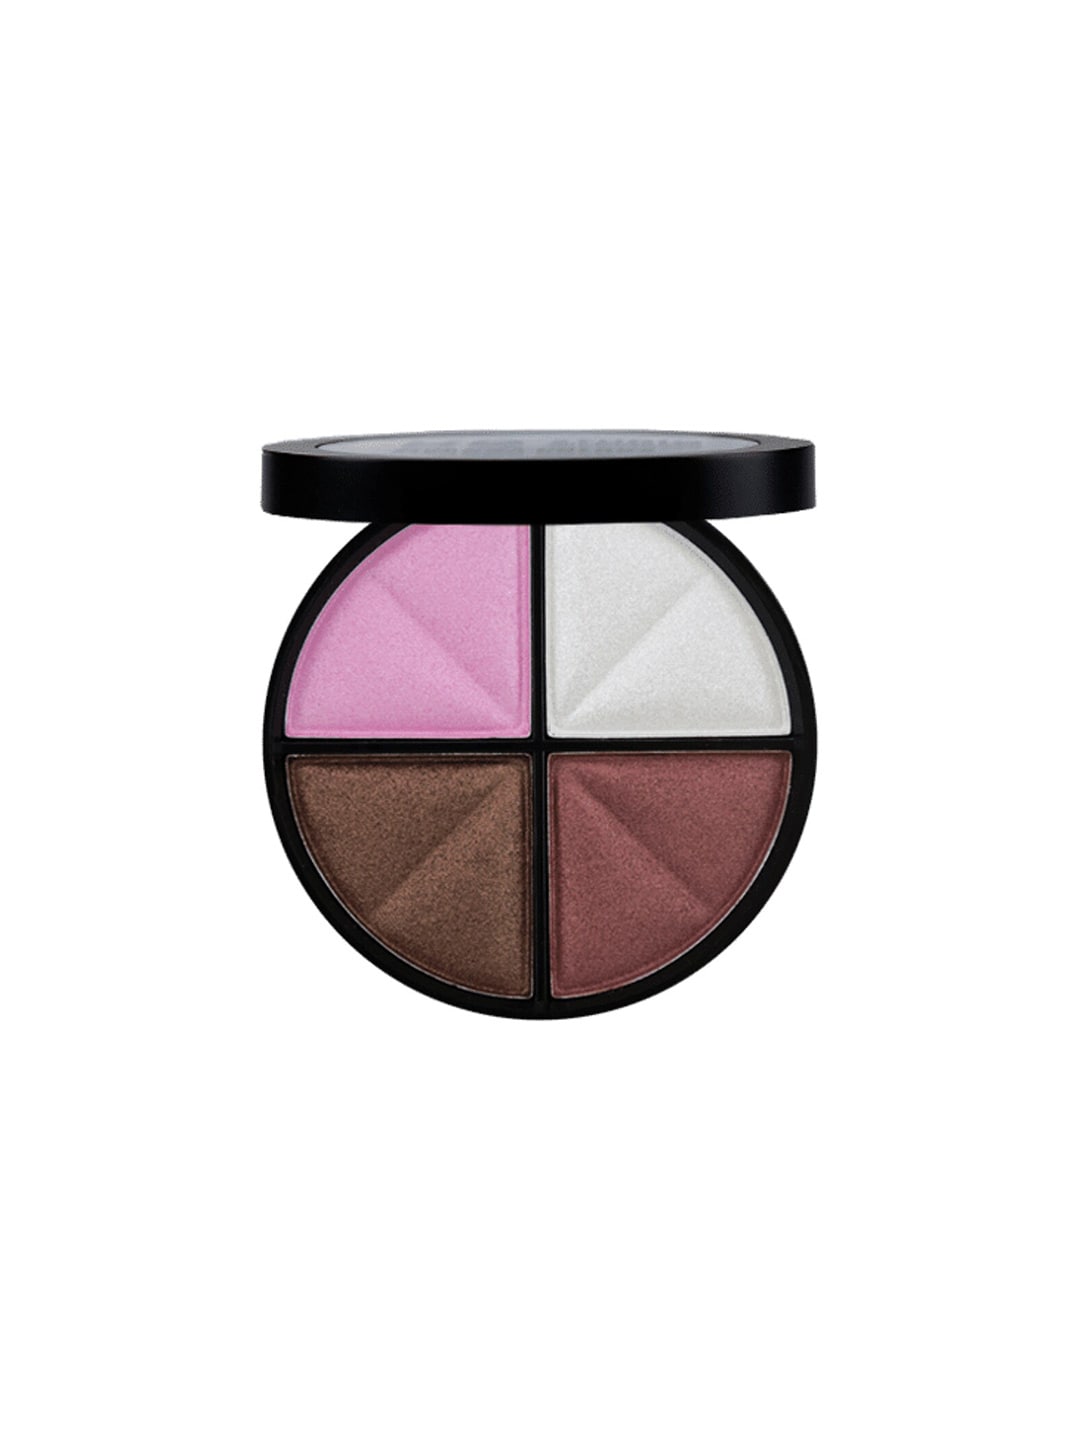 Sivanna Colors HD Studio All Naked Mini Eye Shadow Palette - HF588 04 Price in India